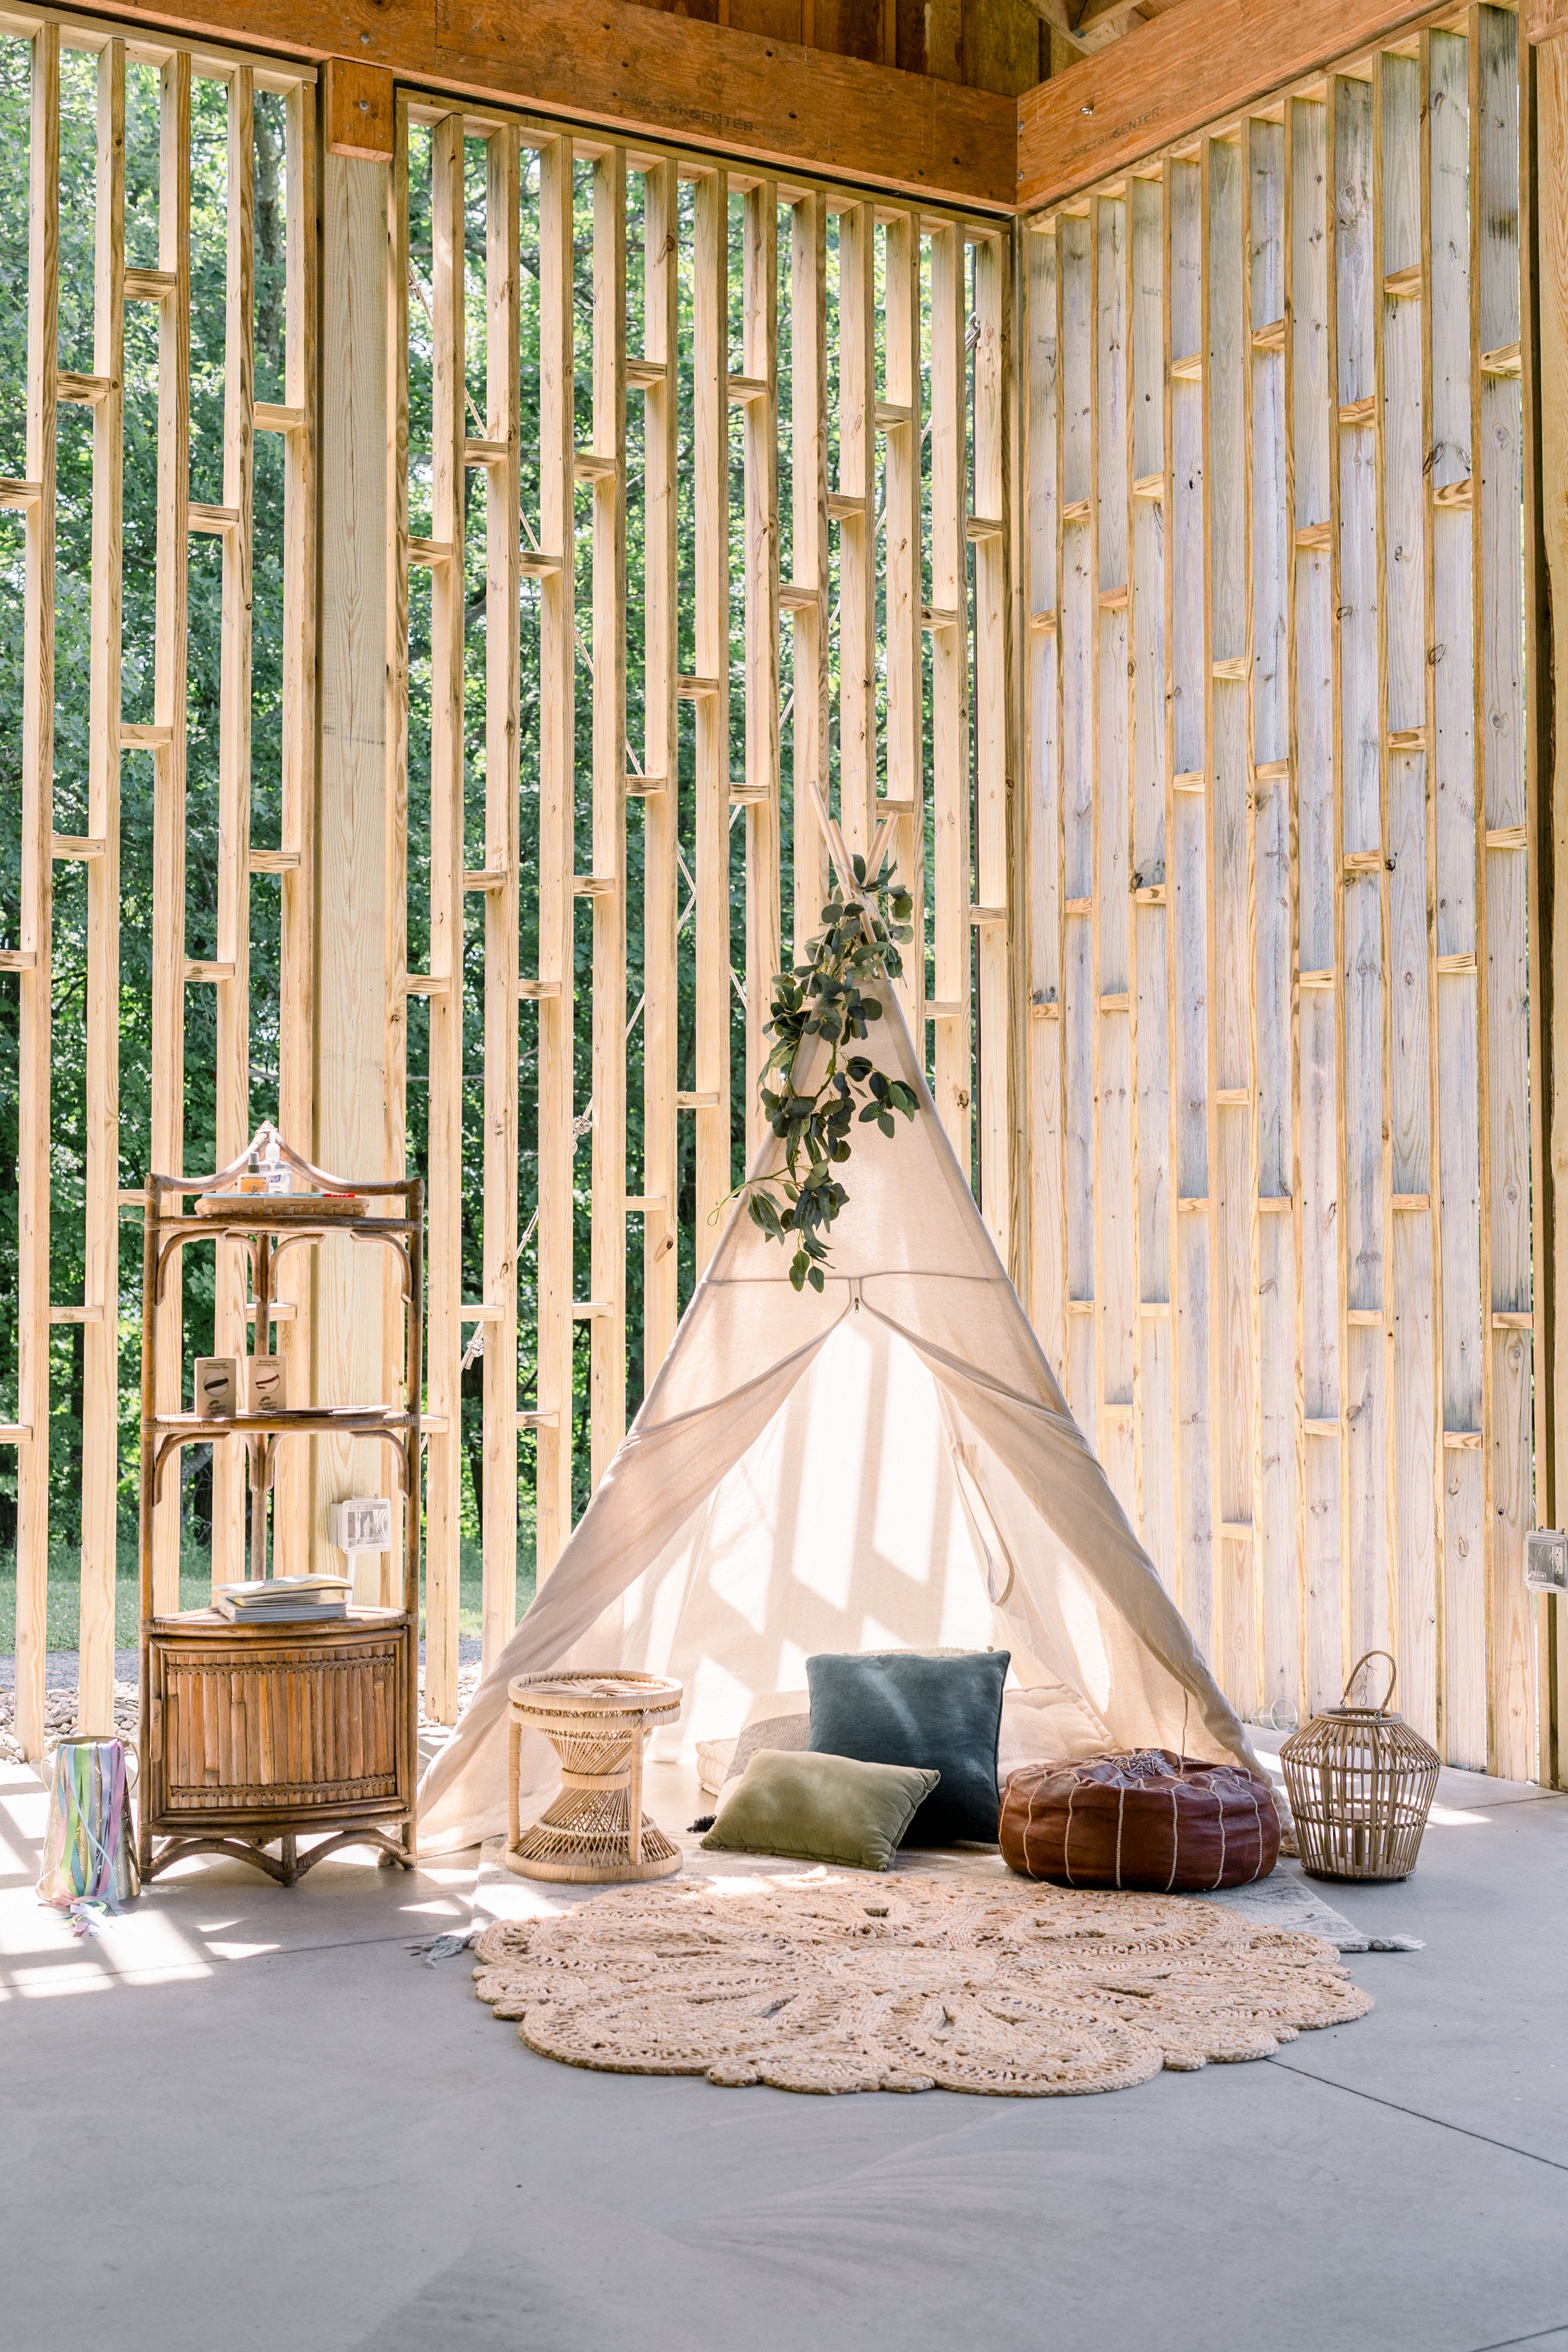 Small teepee with pillows and rugs